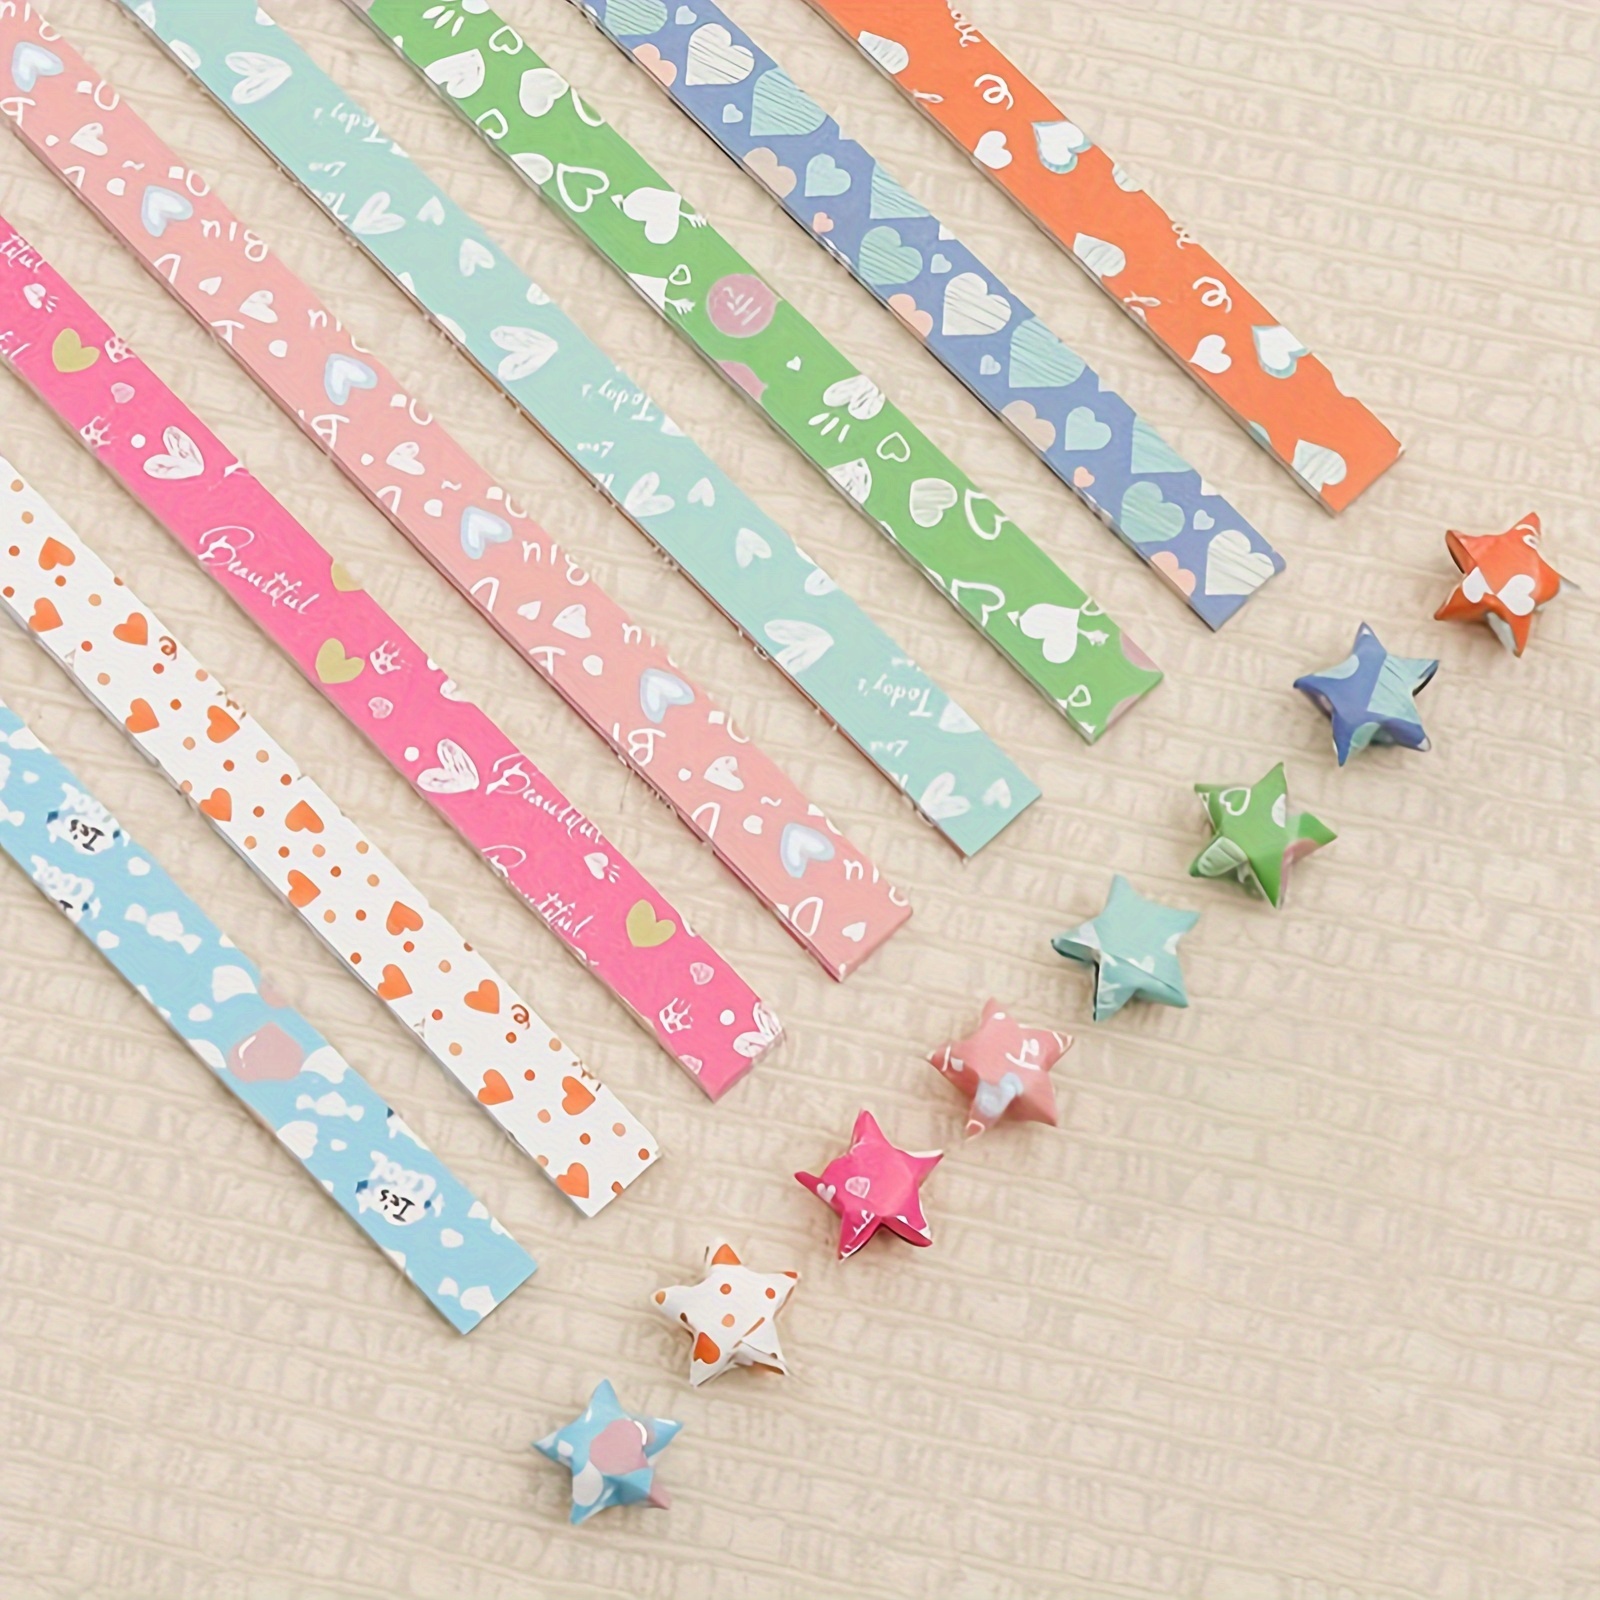 540 Sheets Cartoon Paper Set Outer Space Sky Origami Lucky Star Folding DIY  Decorating Paper Strips Gift With Printed Pattern